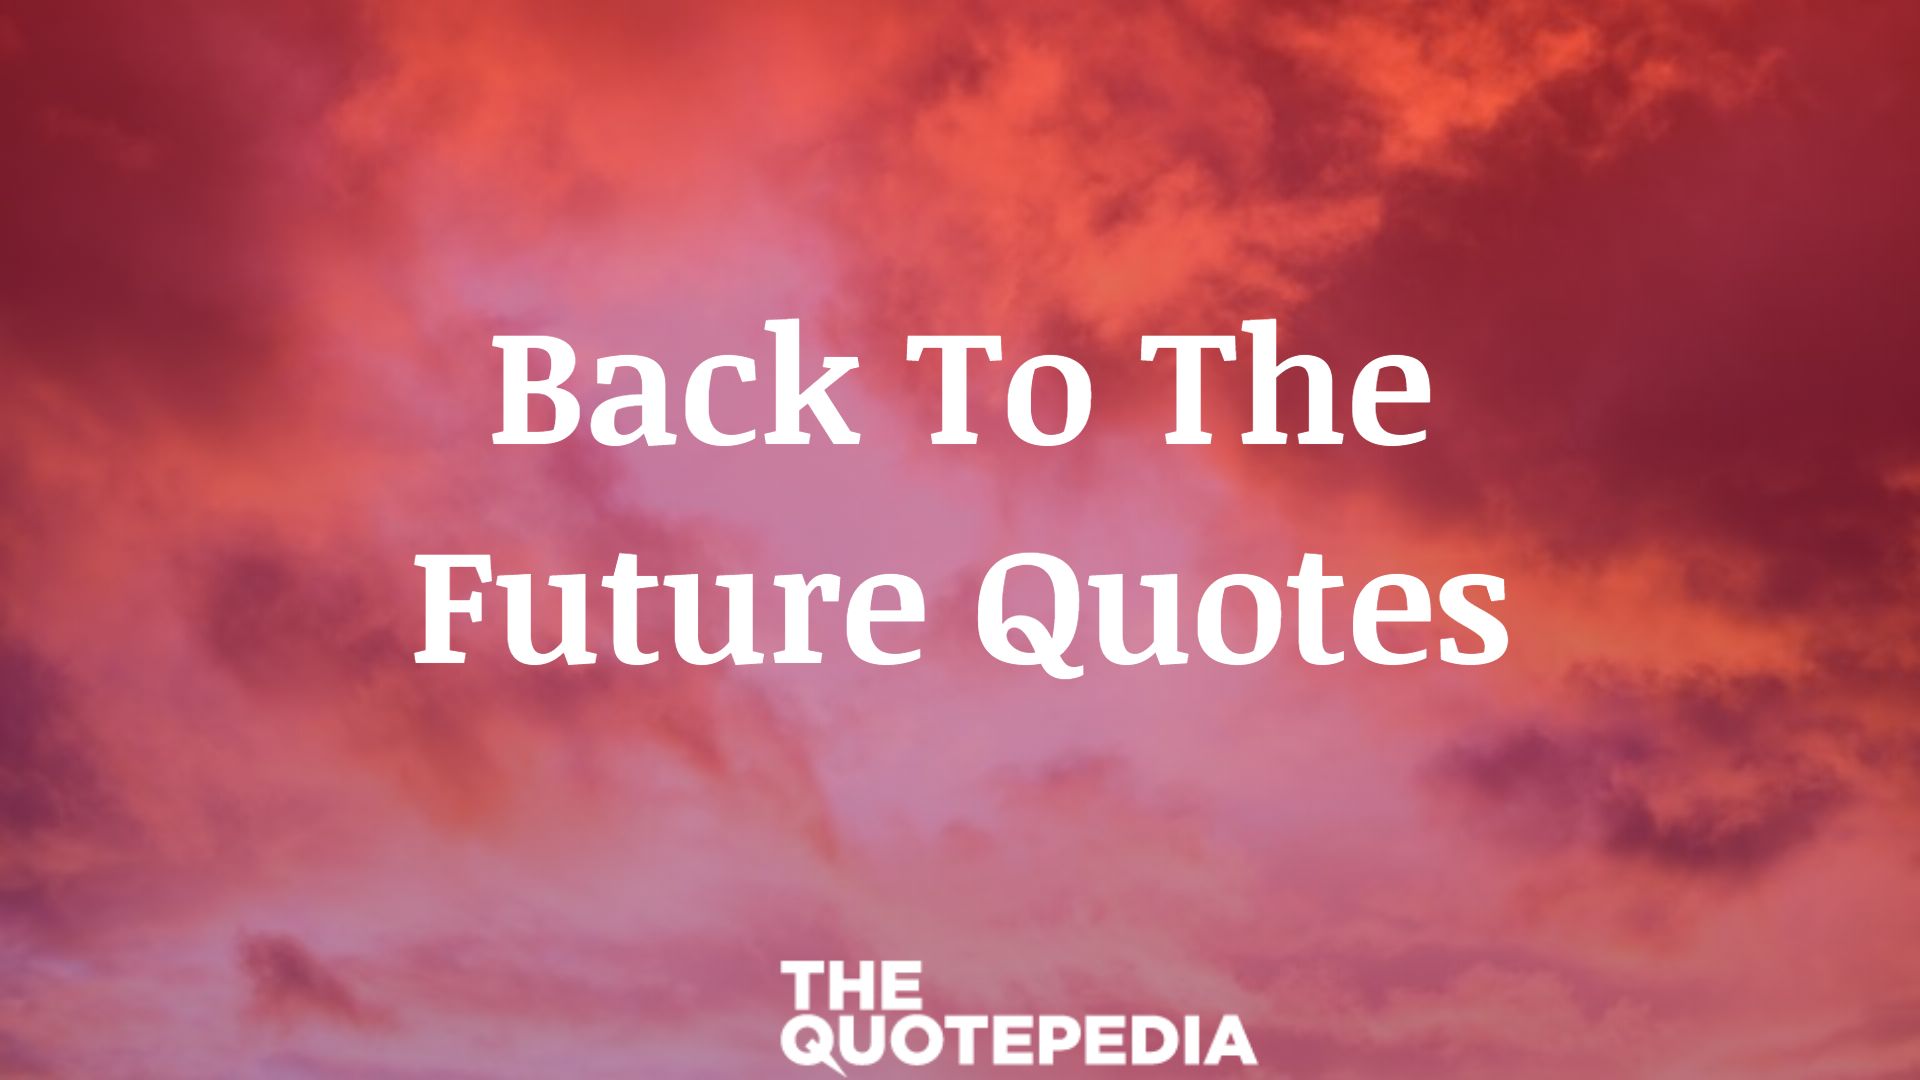 Back To The Future Quotes